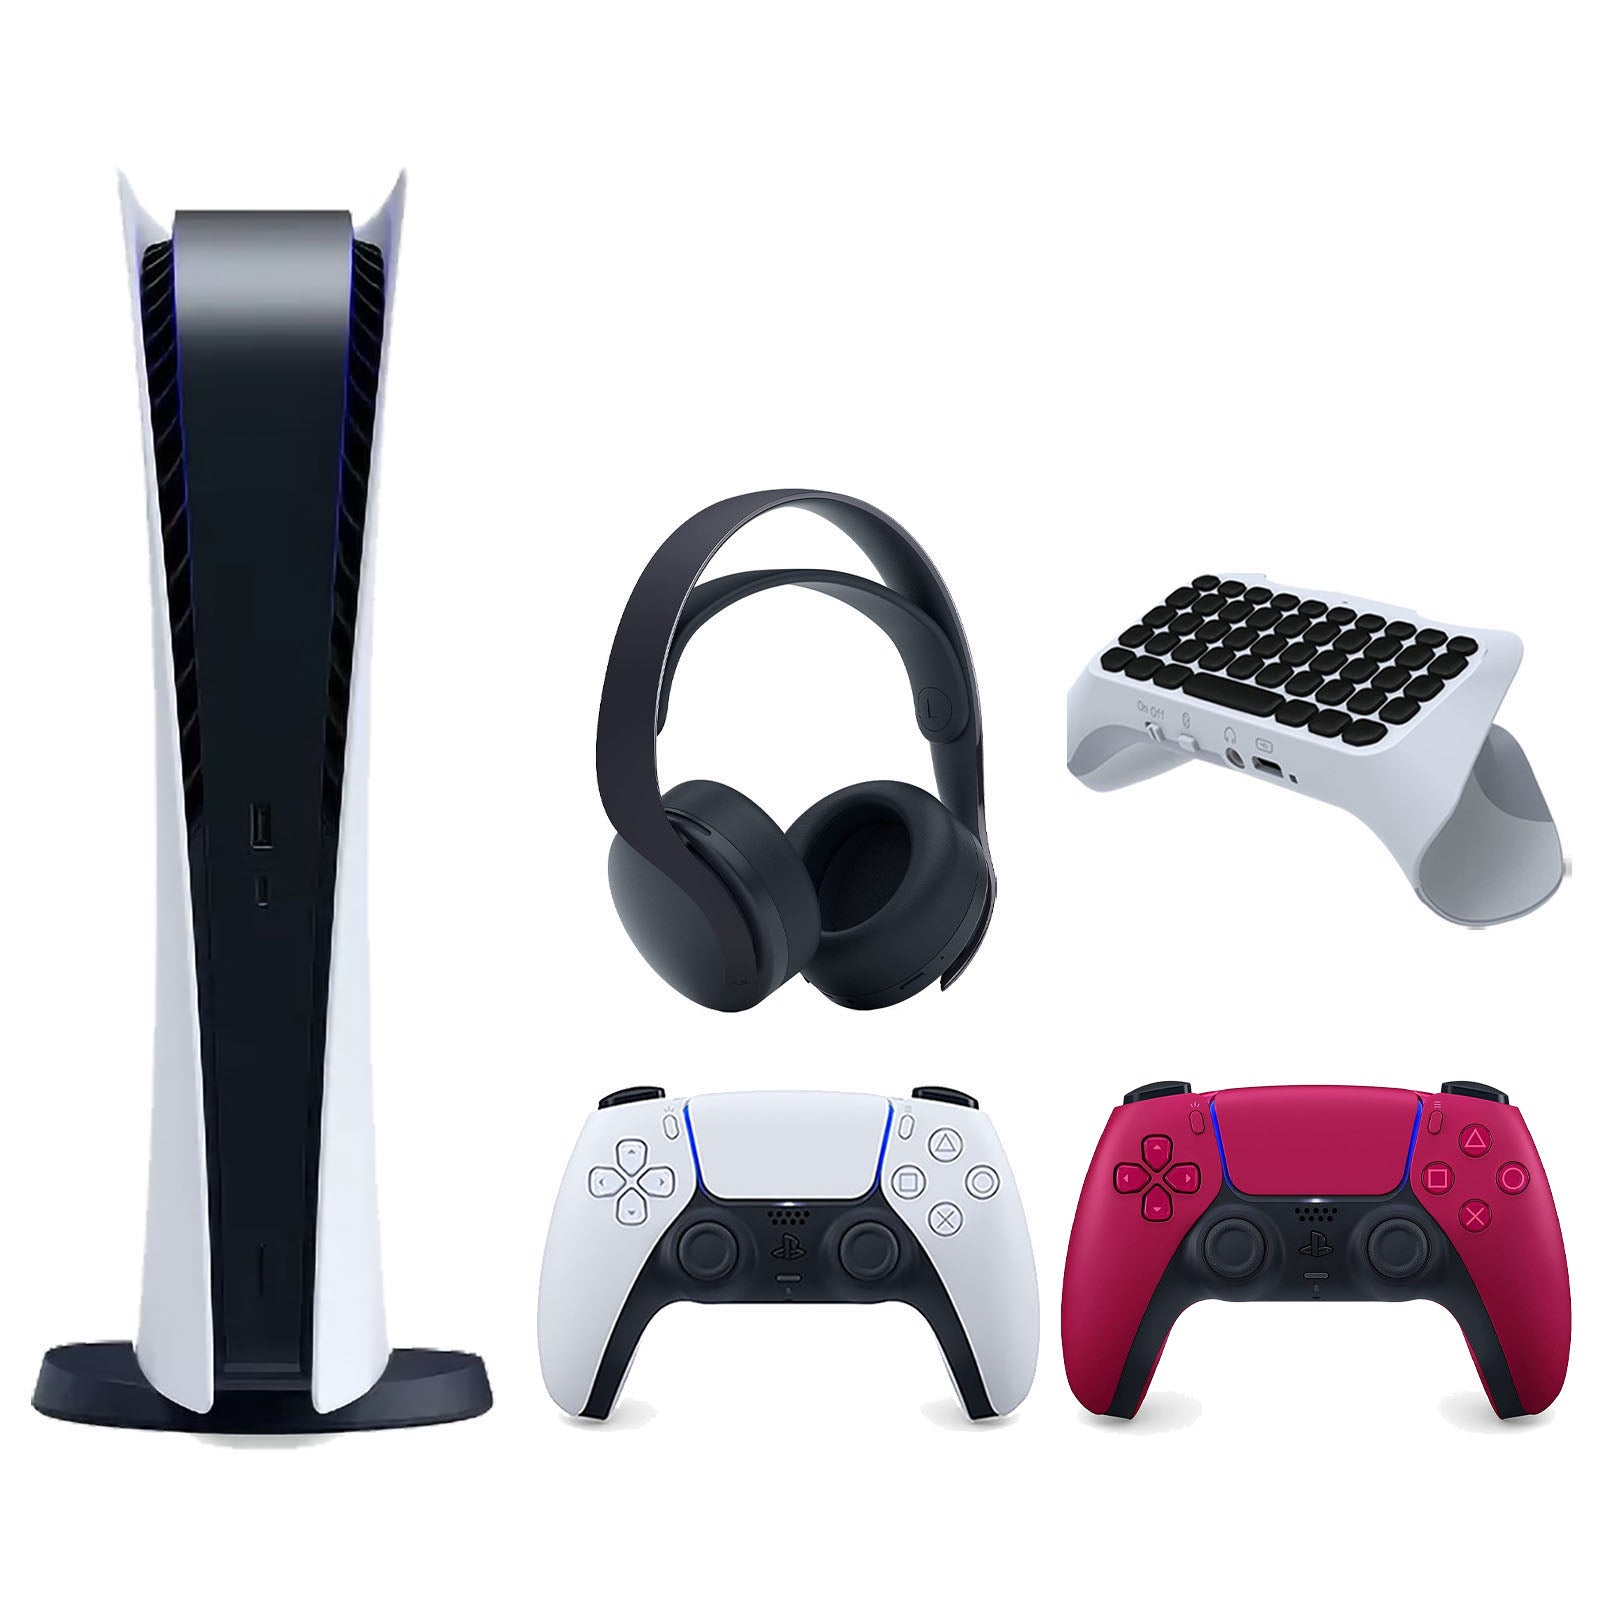 Sony Playstation 5 Digital Edition Console with Extra Red Controller, Black PULSE 3D Headset and Surge QuickType 2.0 Wireless PS5 Controller Keypad Bundle - Pro-Distributing